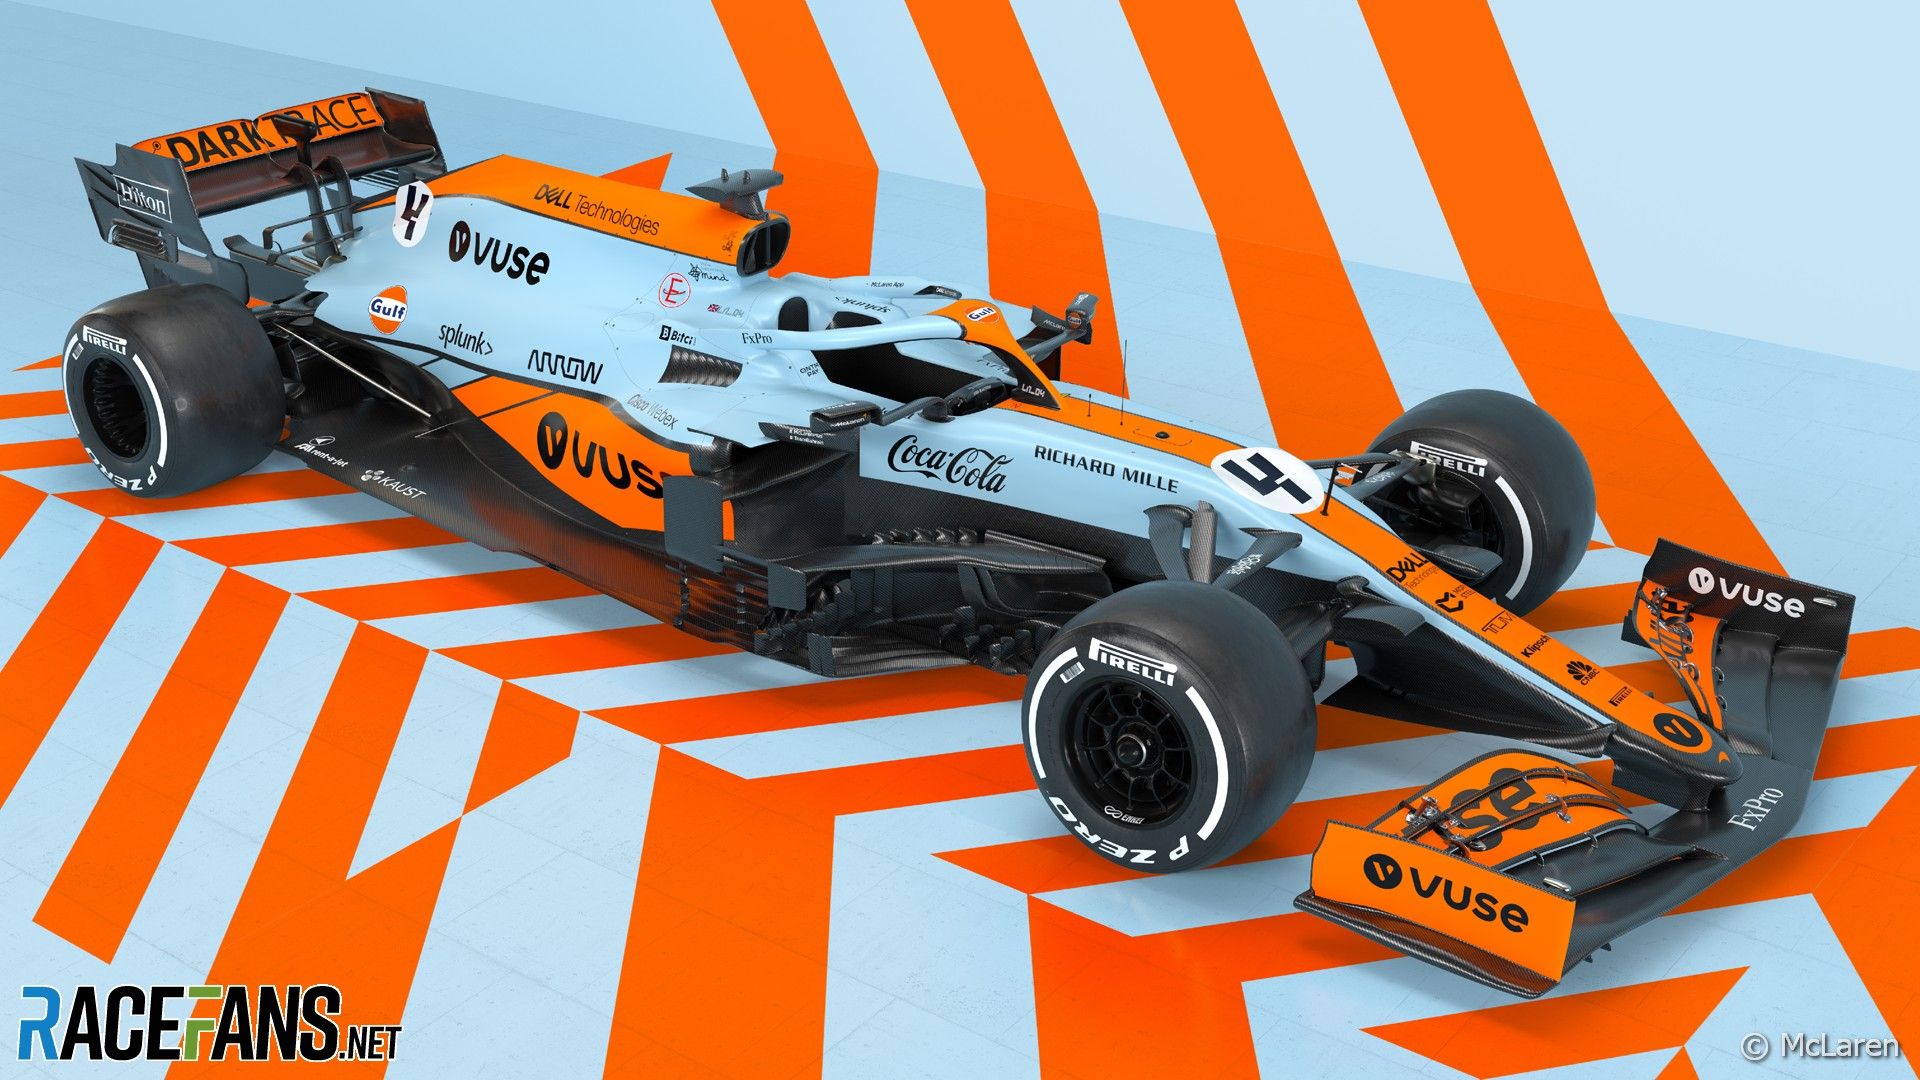 Monaco GP livery even better than our usual design · RaceFans